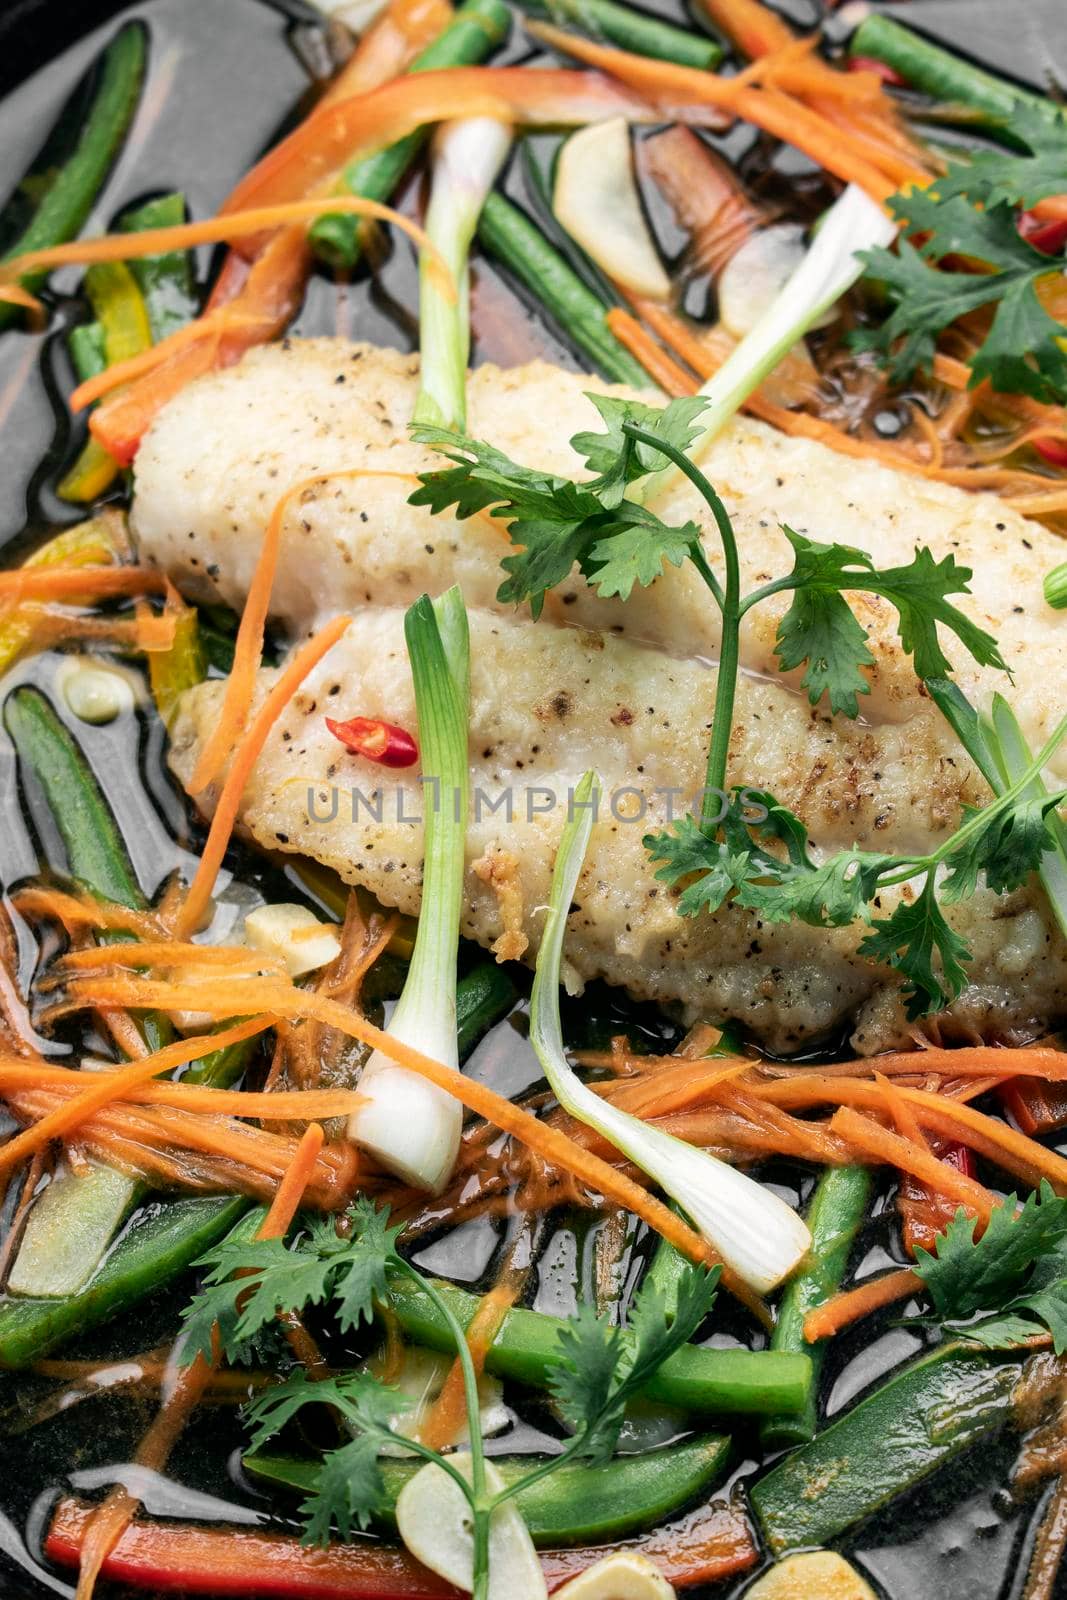 chinese style steamed fish fillet with vegetables on hot plate by jackmalipan